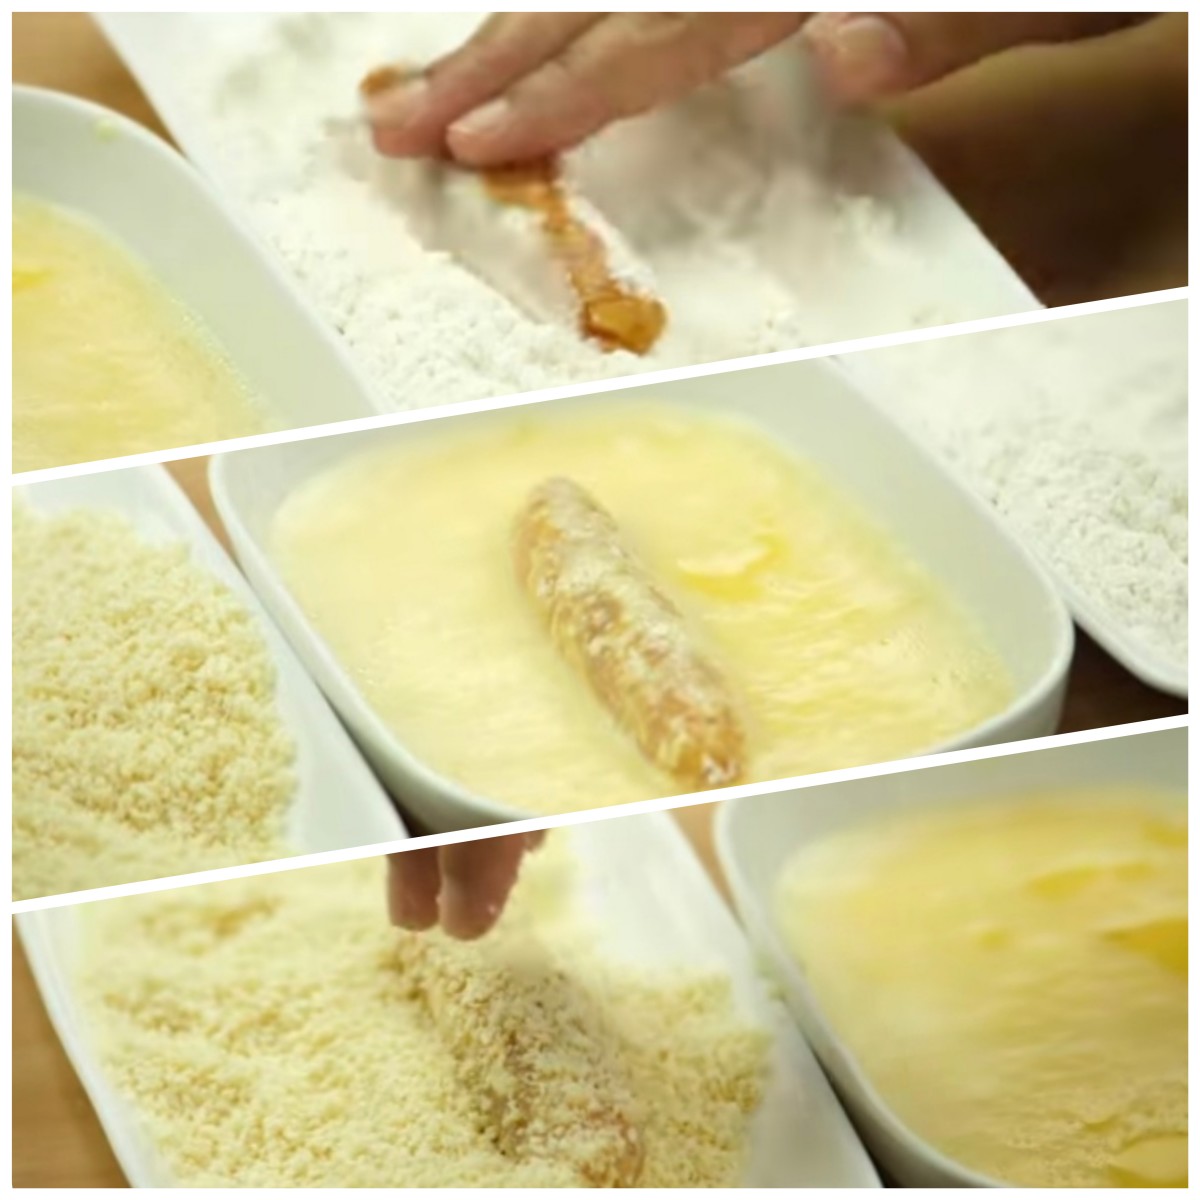 Step 3: Roll the chicken cheese finger in all-purpose flour, then dip it into beaten eggs, and then roll it into bread crumbs.